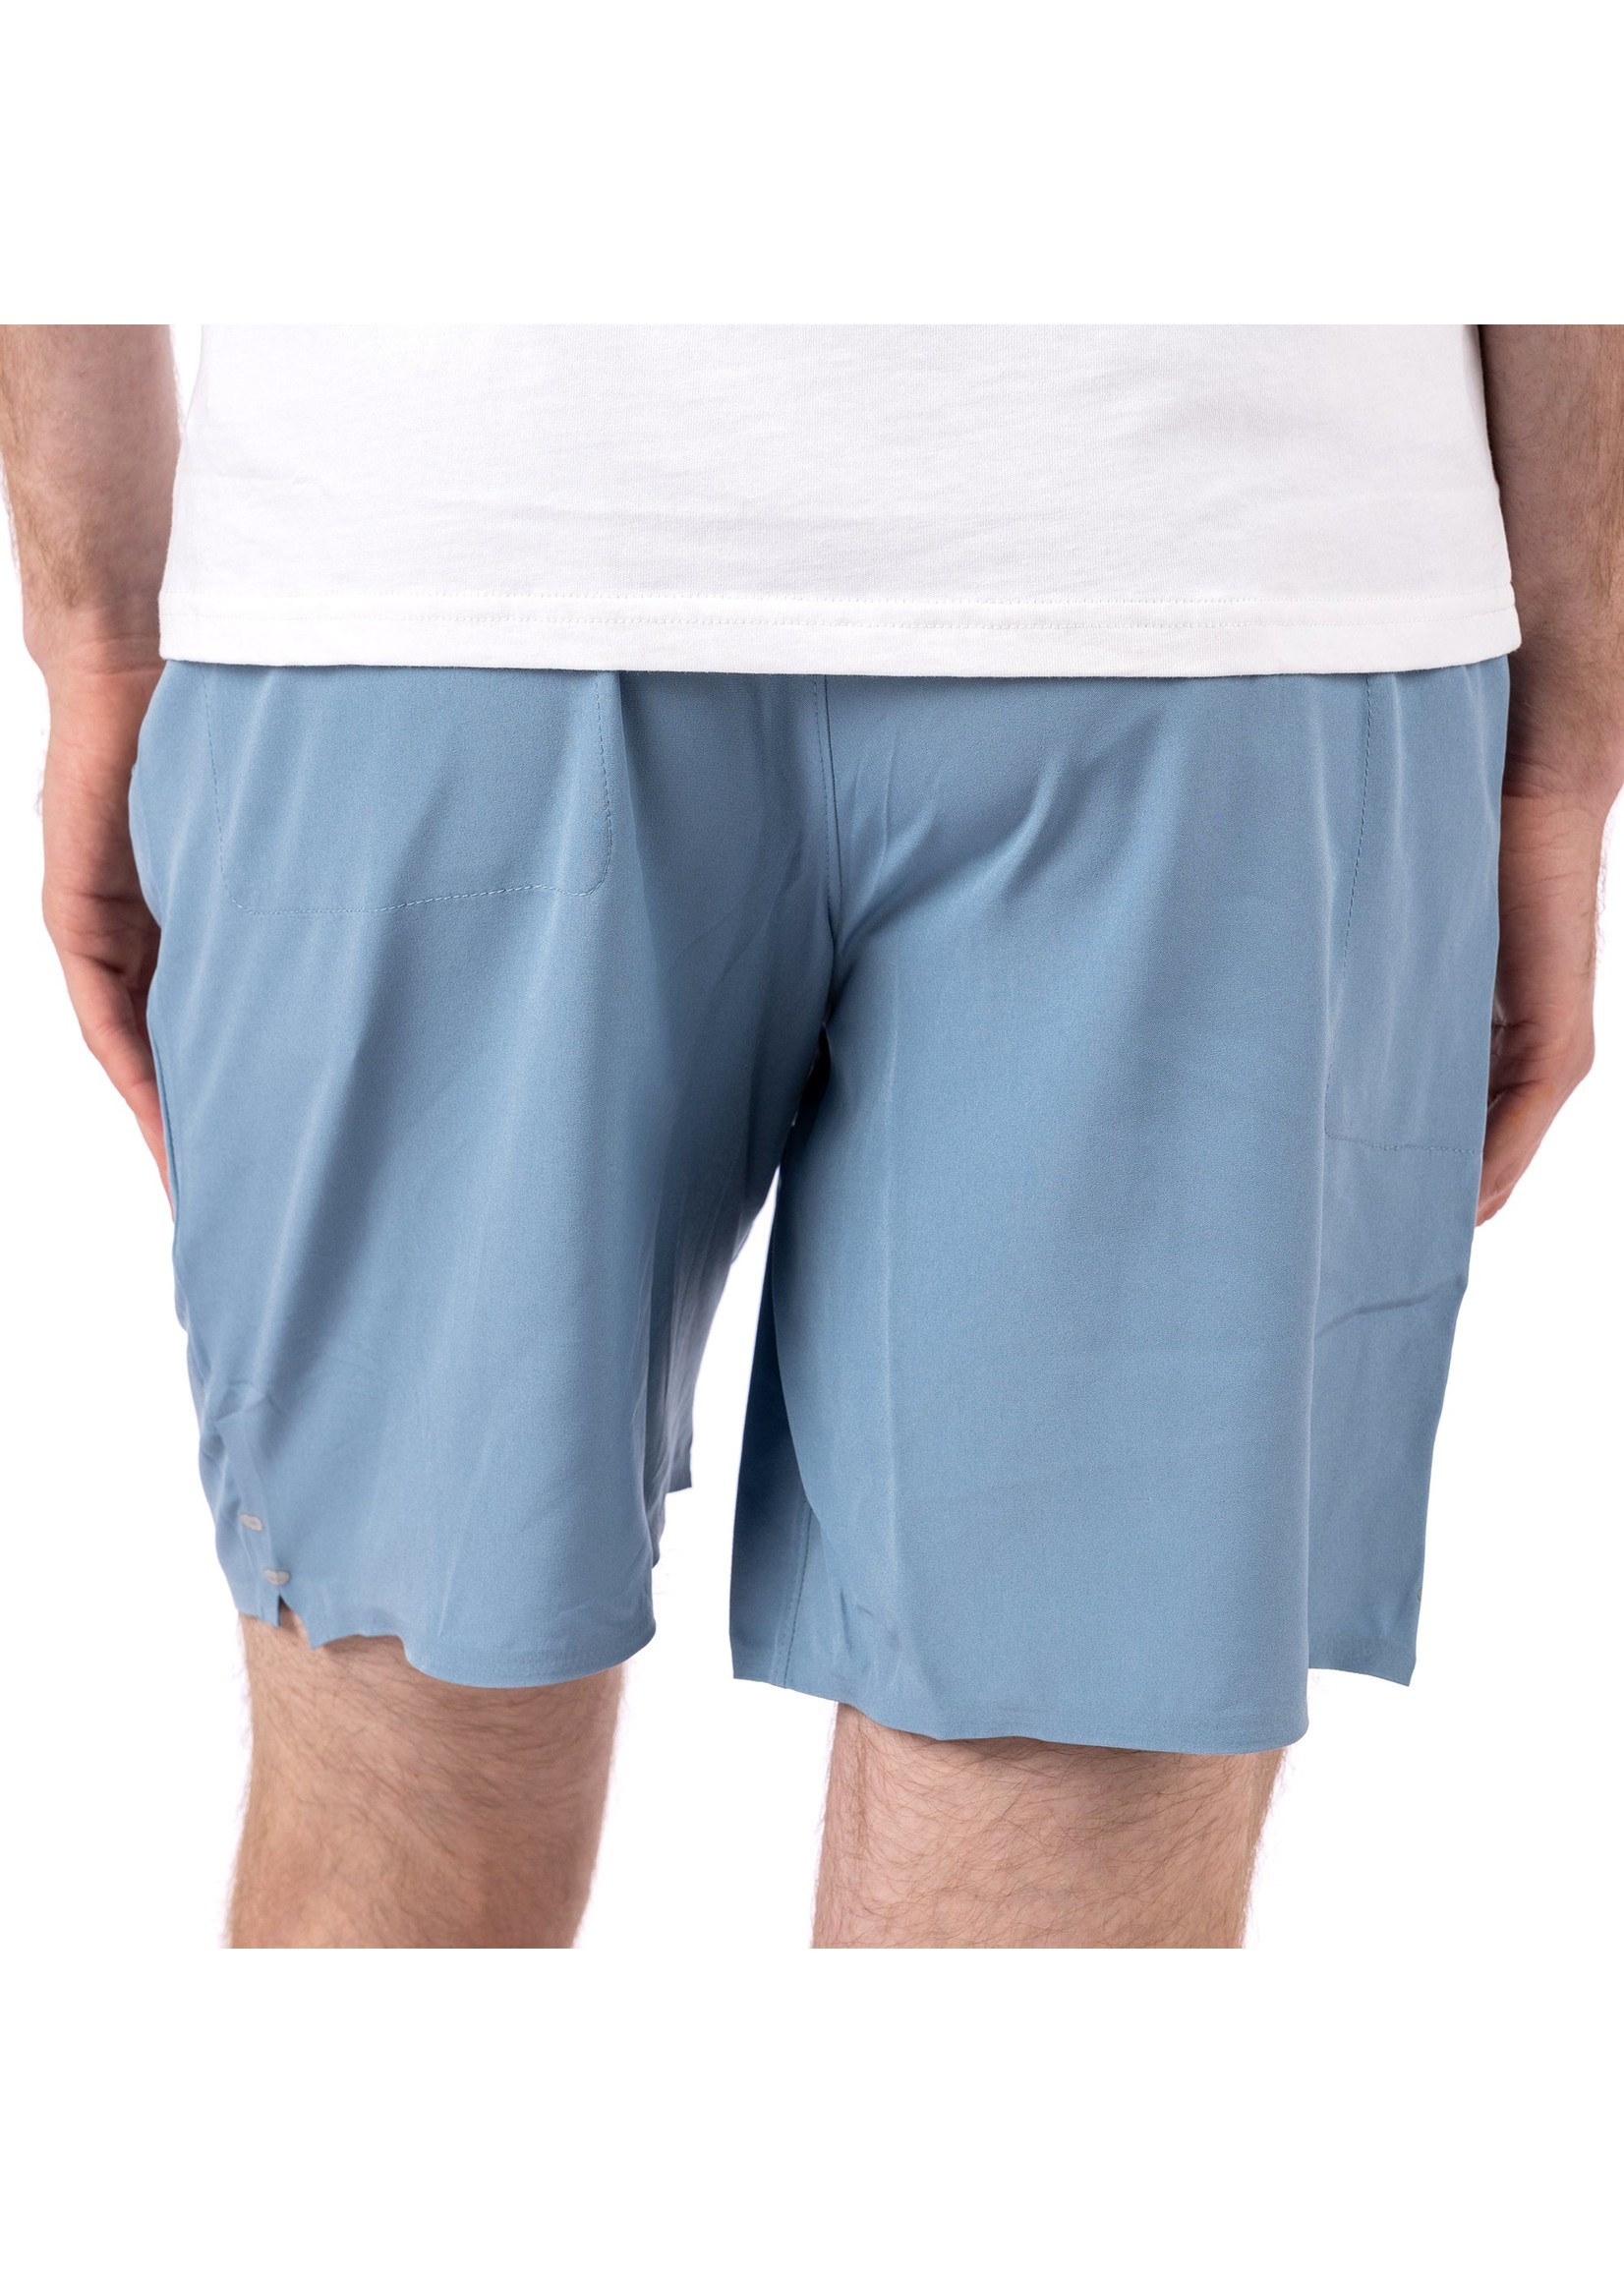 Southern Point Co. All Condition Shorts